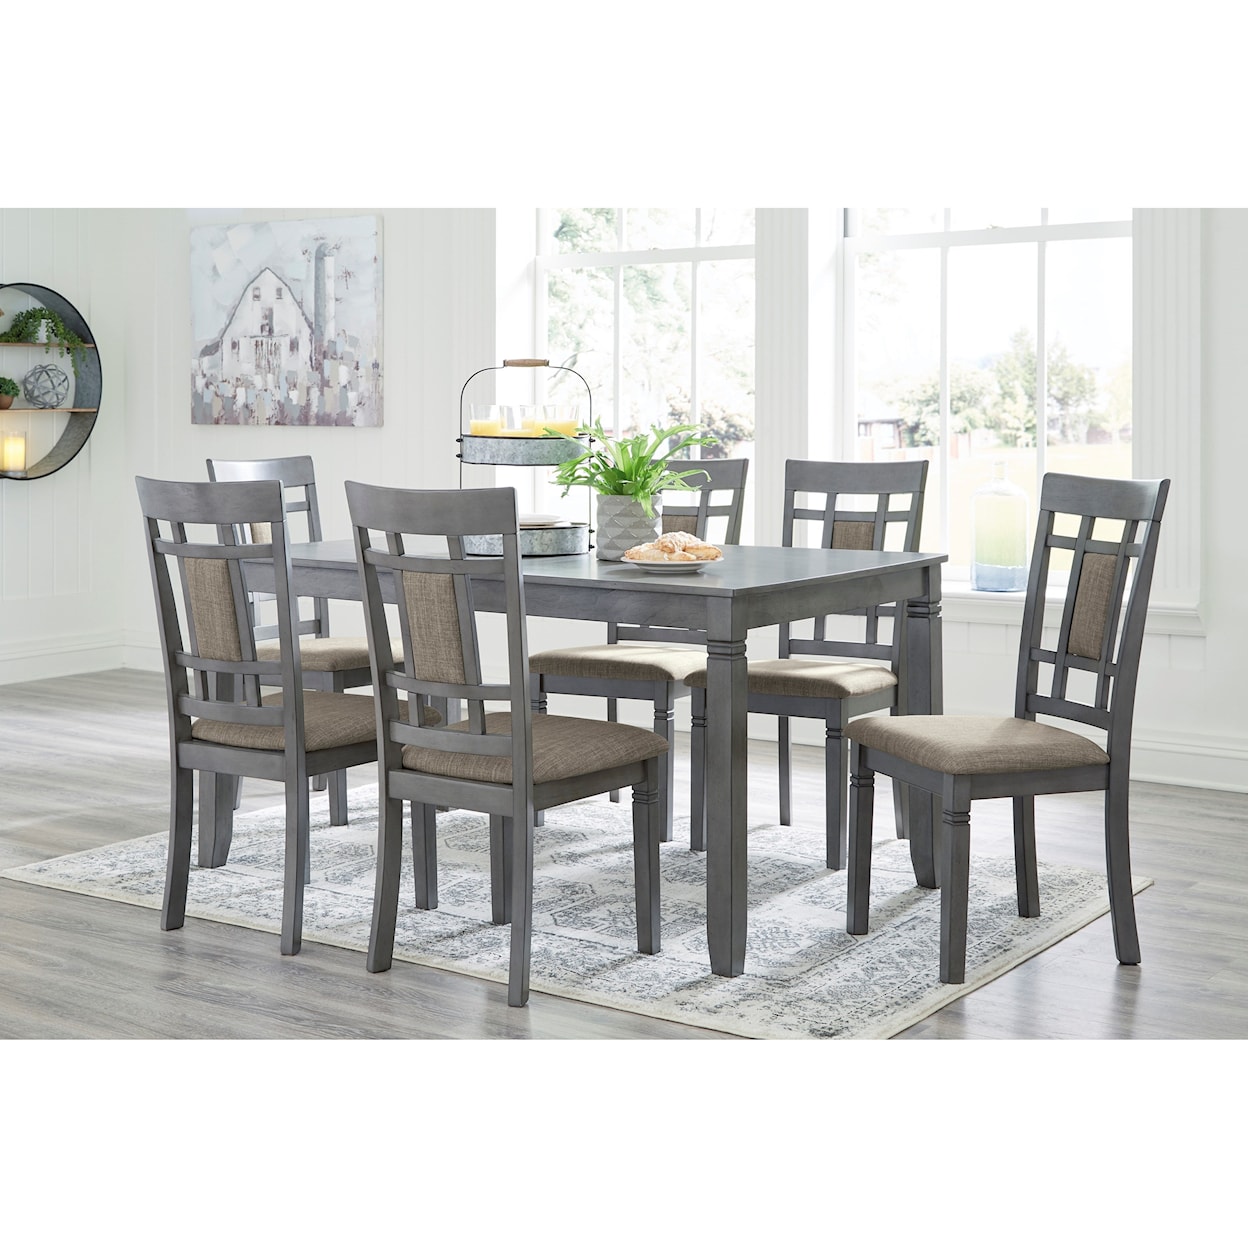 Signature Design by Ashley Jayemyer 7pc Dining Room Group